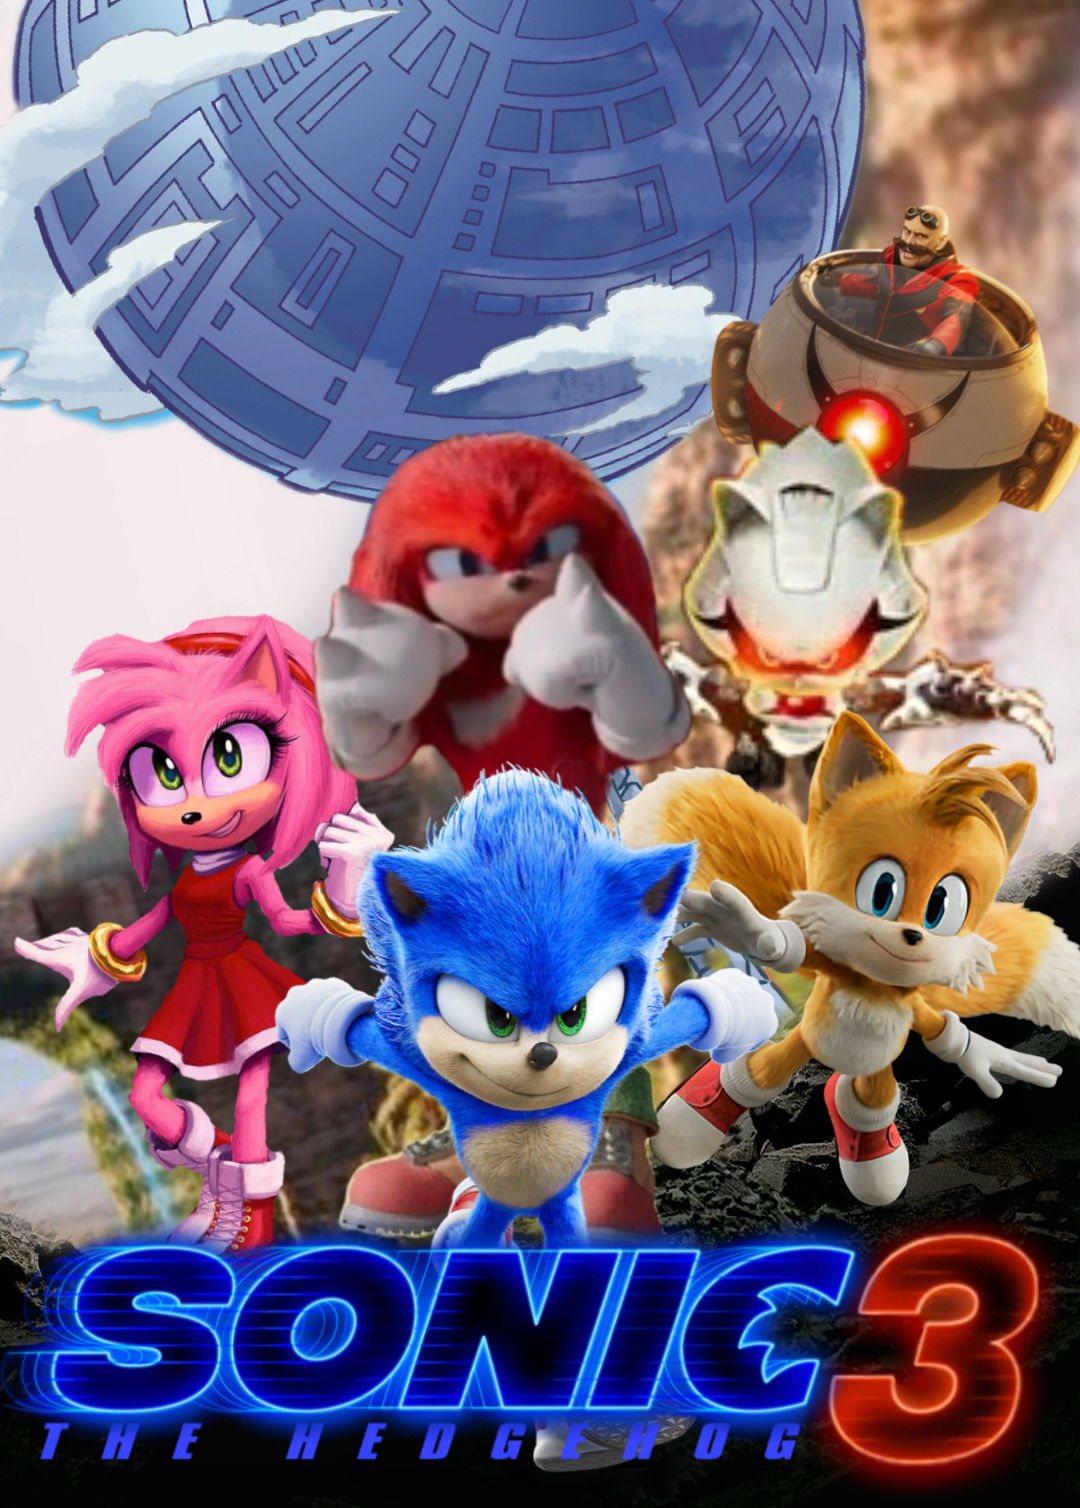 How long is Sonic the Hedgehog 3 & Knuckles?